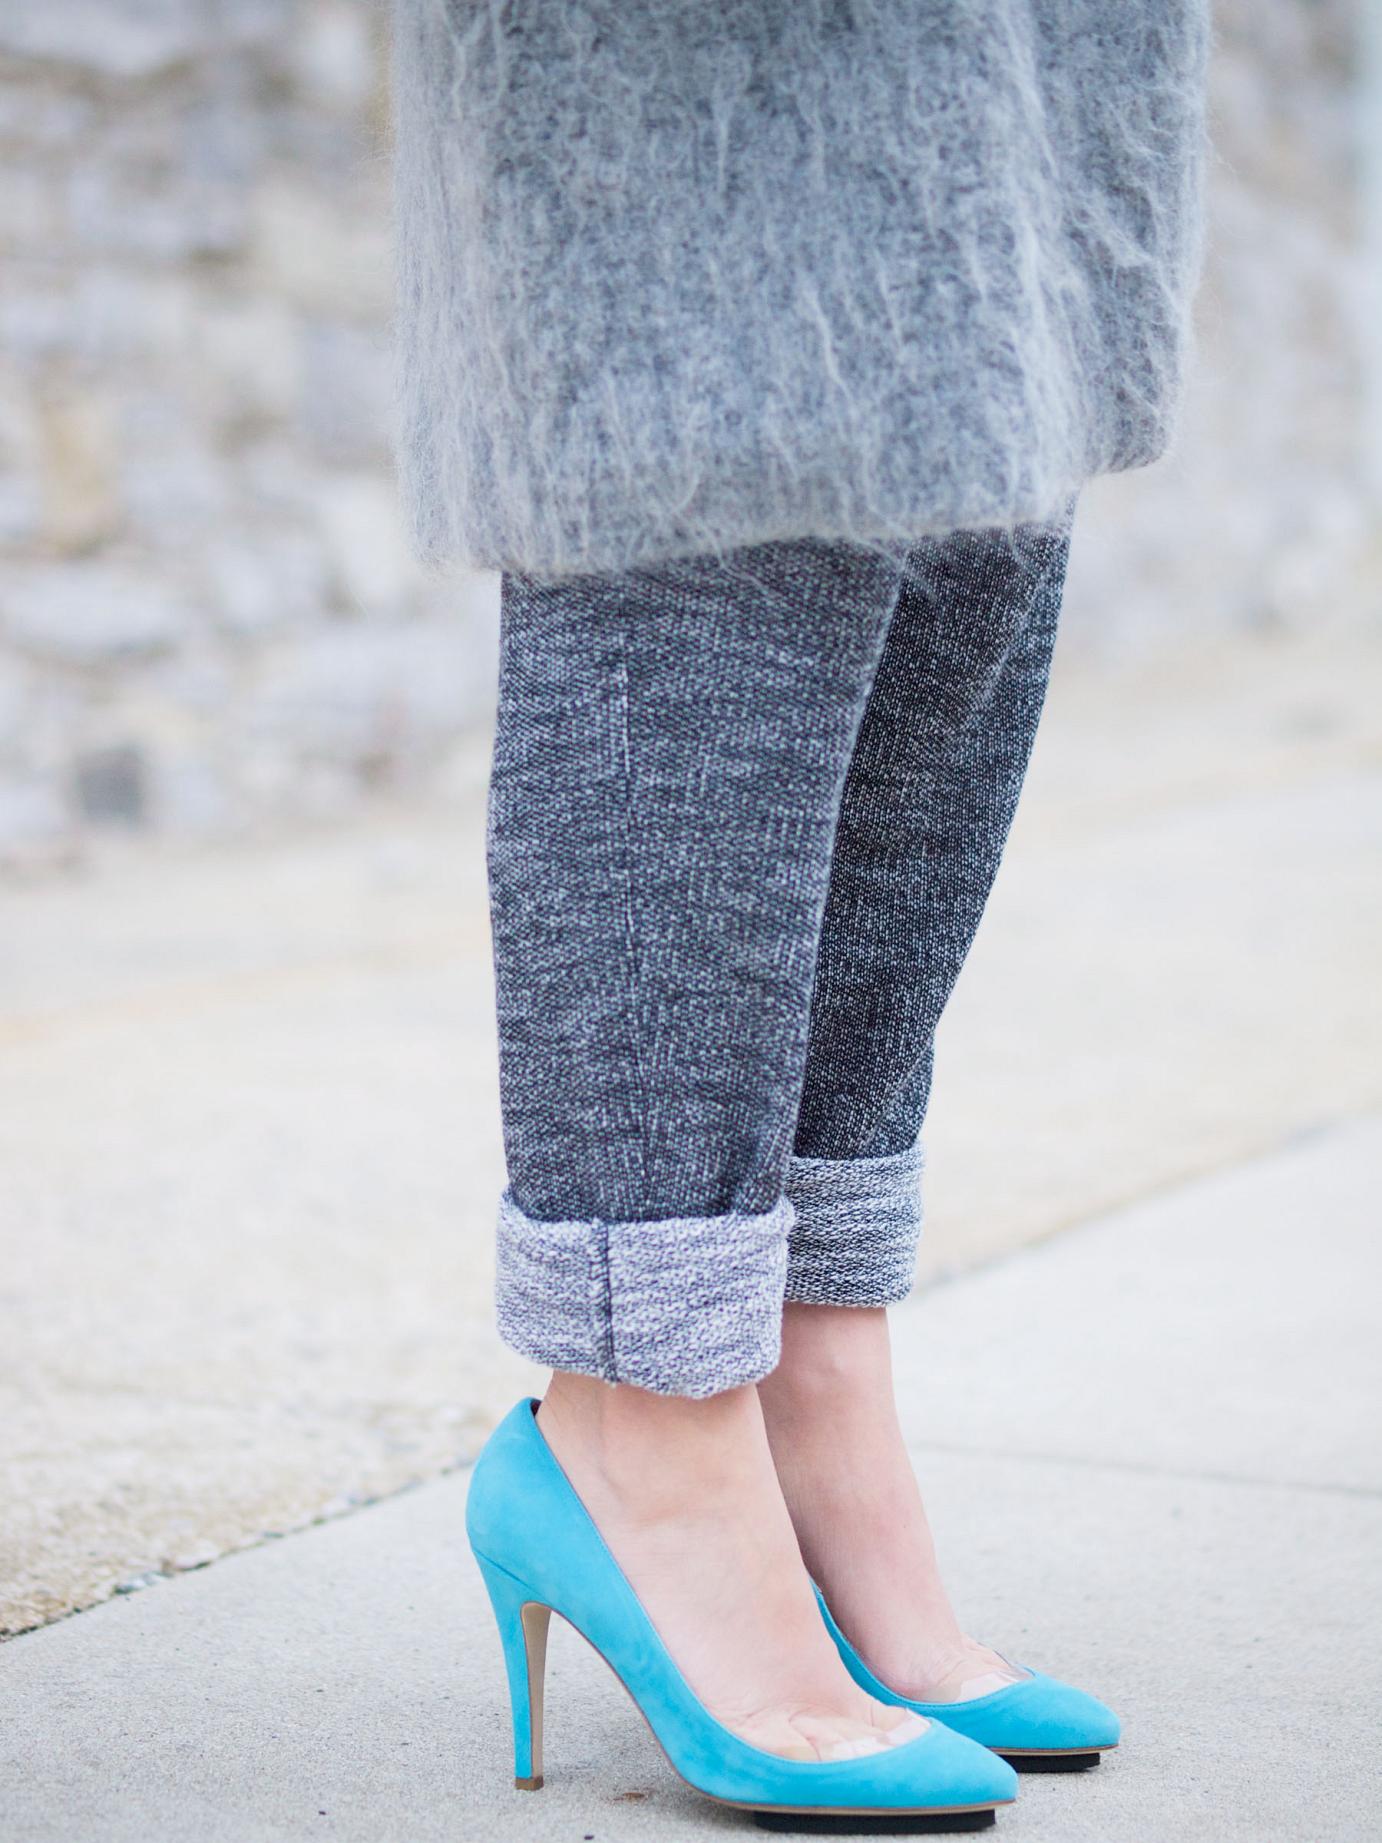 bittersweet colours, grey coat, fuzzy coat, grey outfit, konstantina tzovolou shoes, sophie hulme bag, fall street style, street style, maternity style, 25 weeks, sweater weather, 